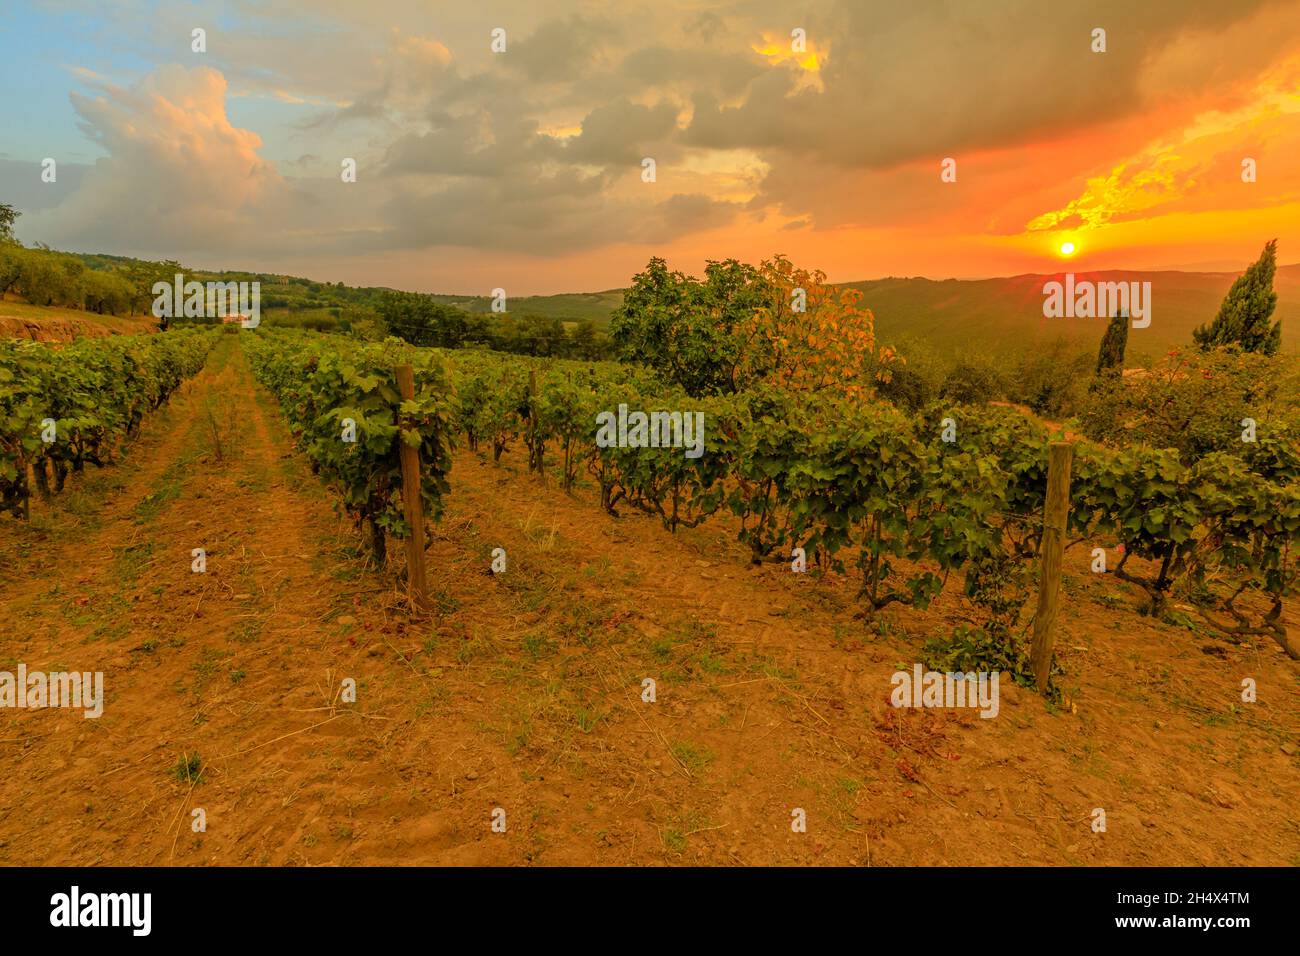 Tuscany in Italy: Vineyard Terrace in Montalcino winegrowing village in the Italian countryside at sunset. Tuscan mountain vineyards of Italy wine Stock Photo